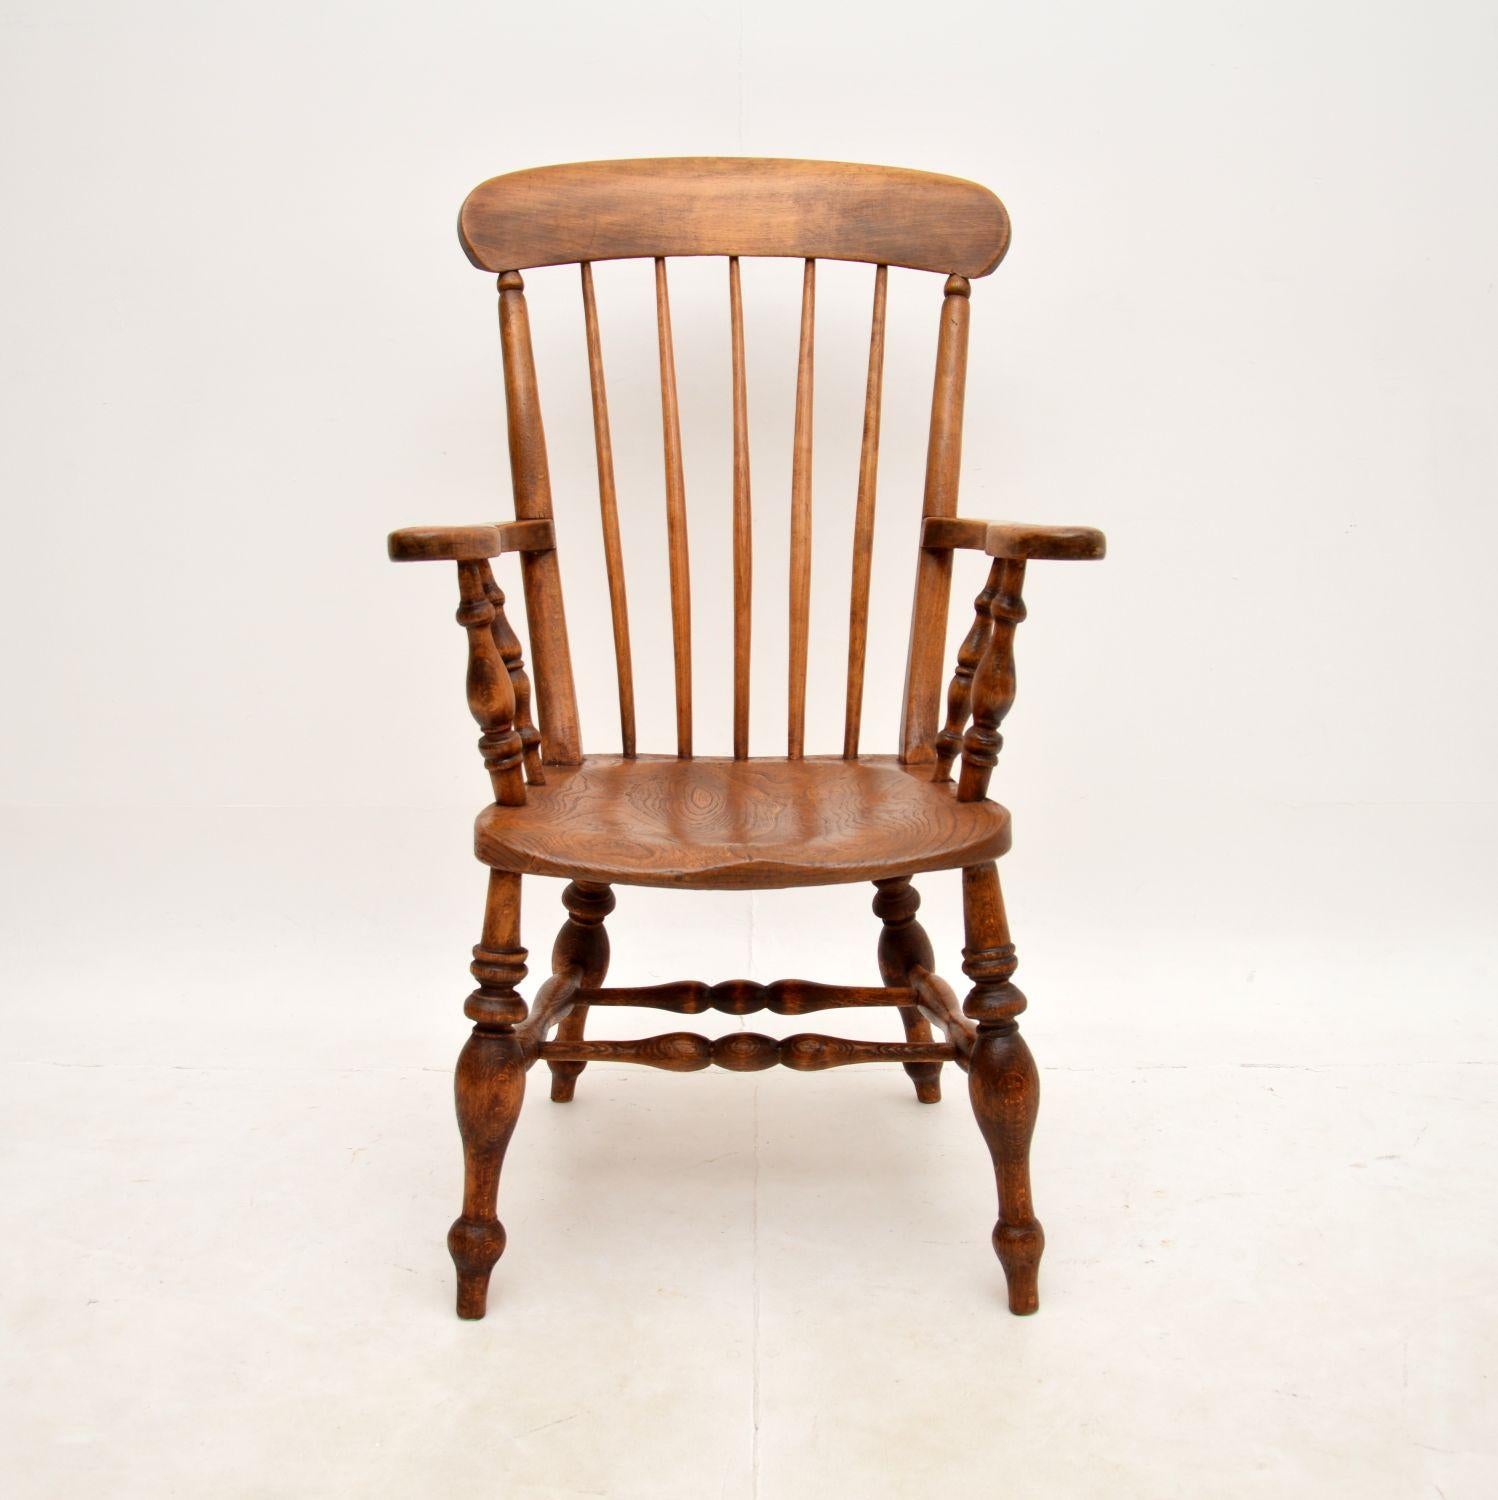 A wonderful original antique Victorian Windsor armchair. This was made in England, it dates from around the 1860-1880 period.

The quality is fantastic, the seat is made from stunning solid elm and the rest of the frame appears to be solid birch.